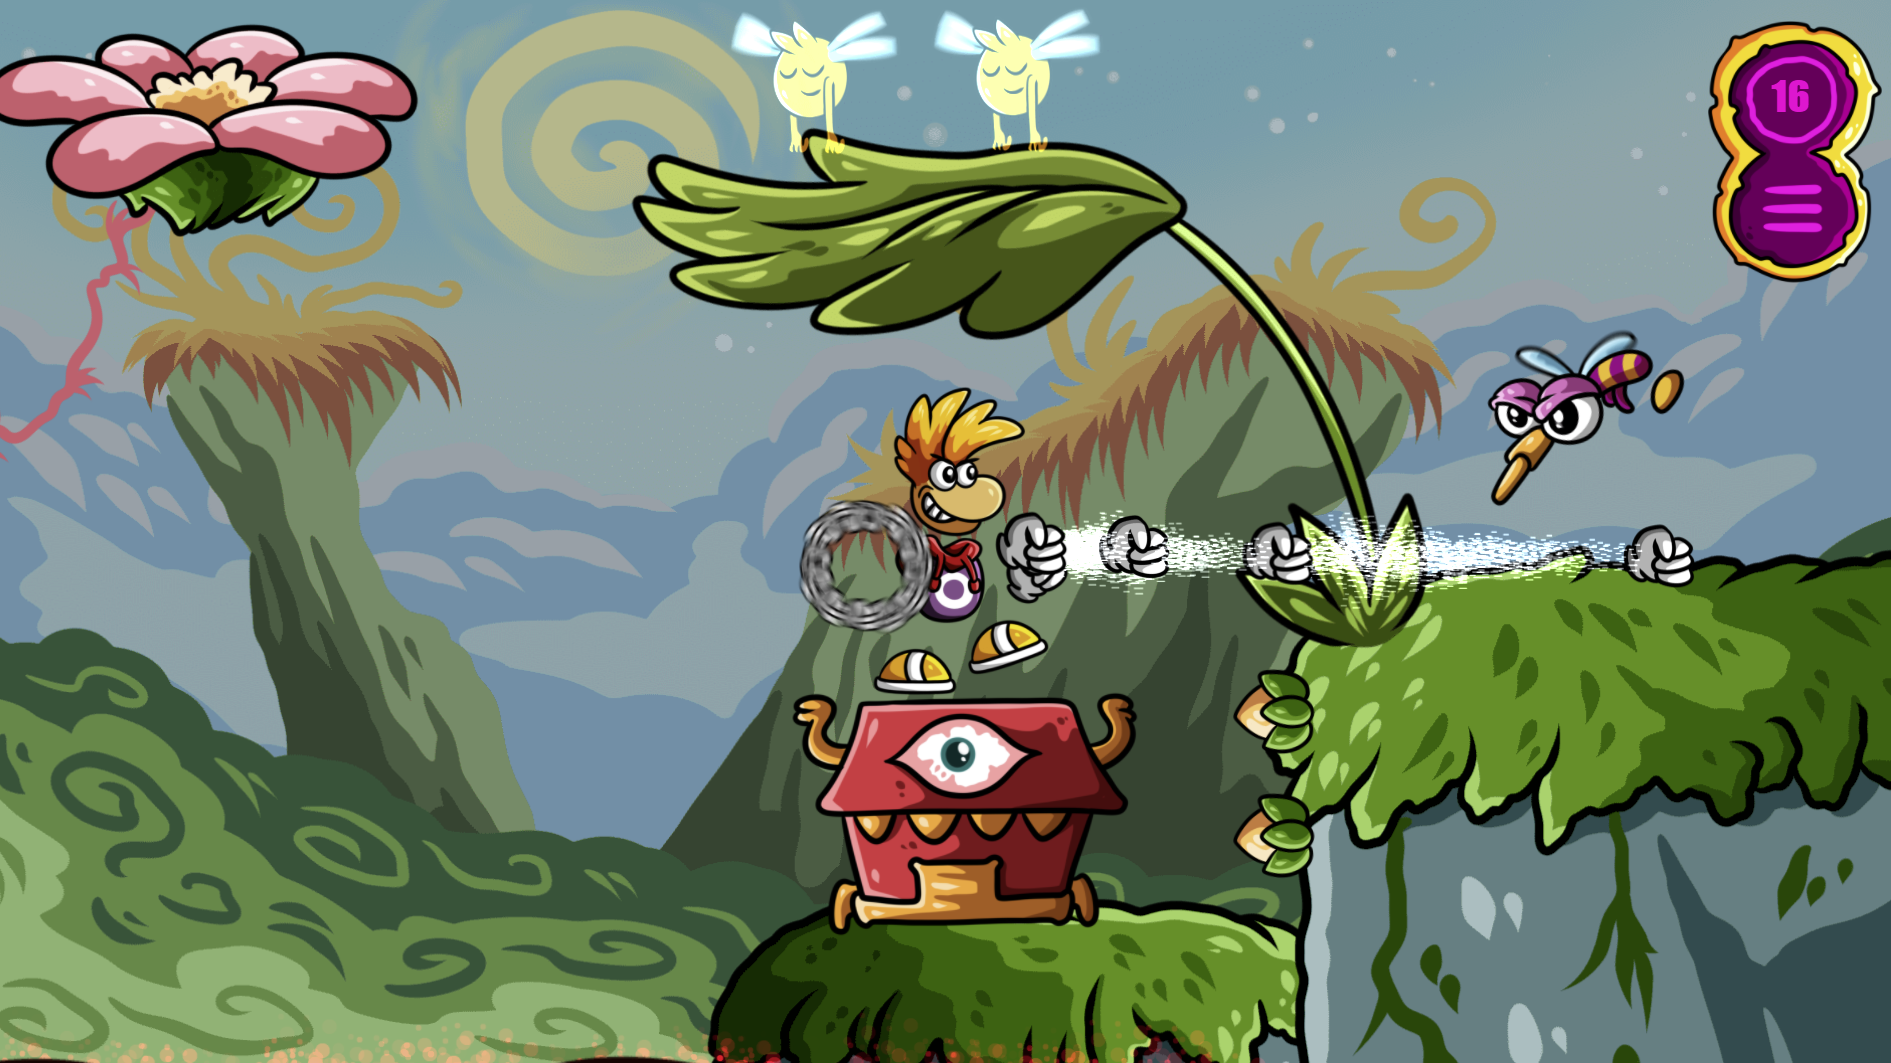 Official concept art of the video game rayman 4